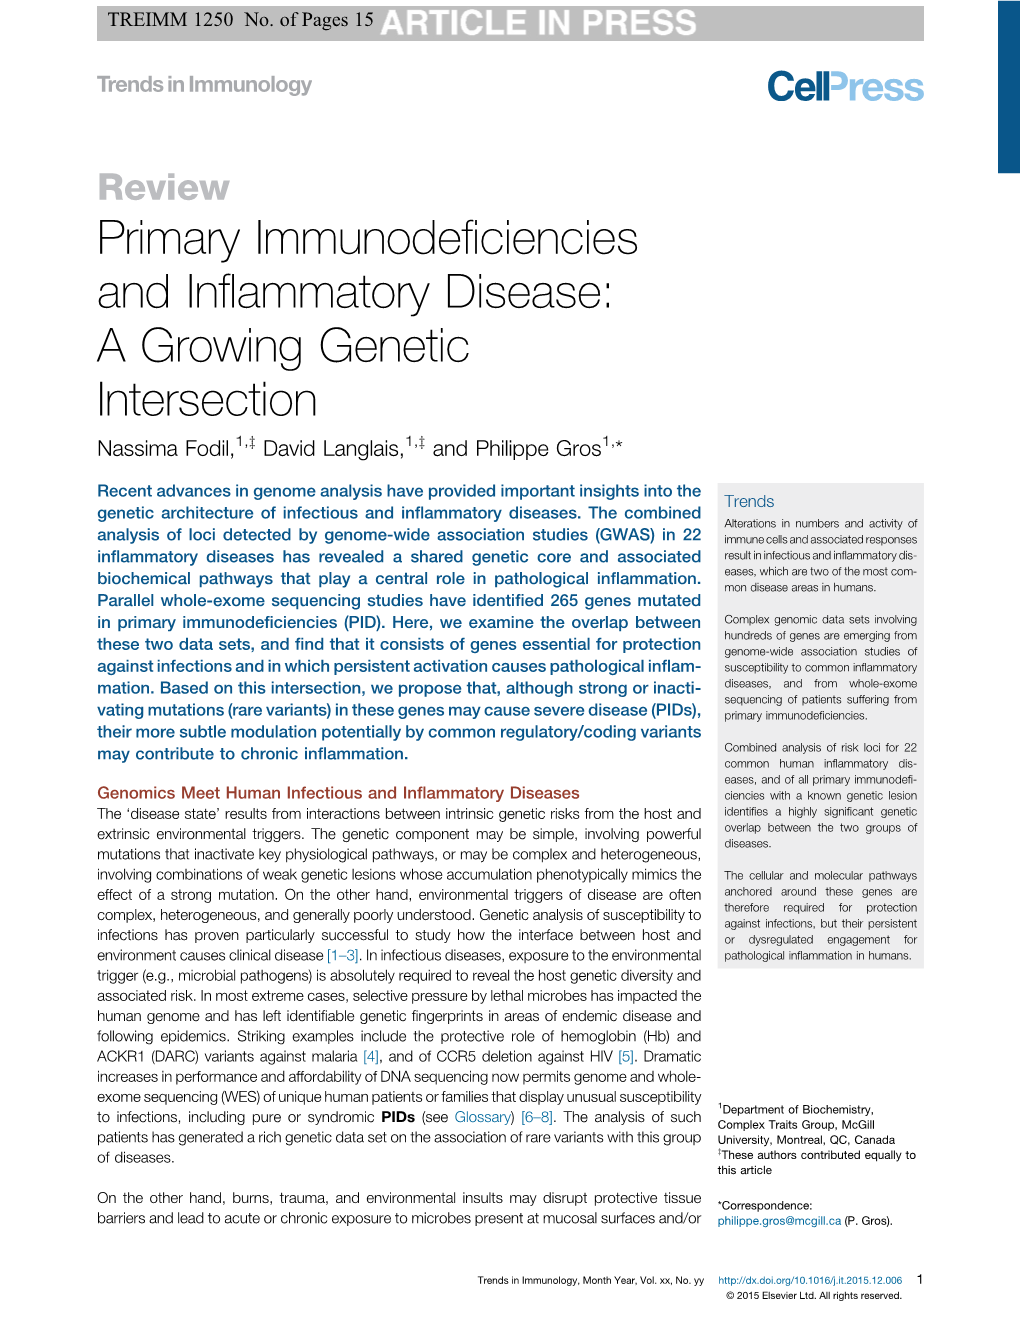 Review Primary Immunodeﬁciencies and Inﬂammatory Disease: a Growing Genetic Intersection Nassima Fodil,1,Z David Langlais,1,Z and Philippe Gros1,*